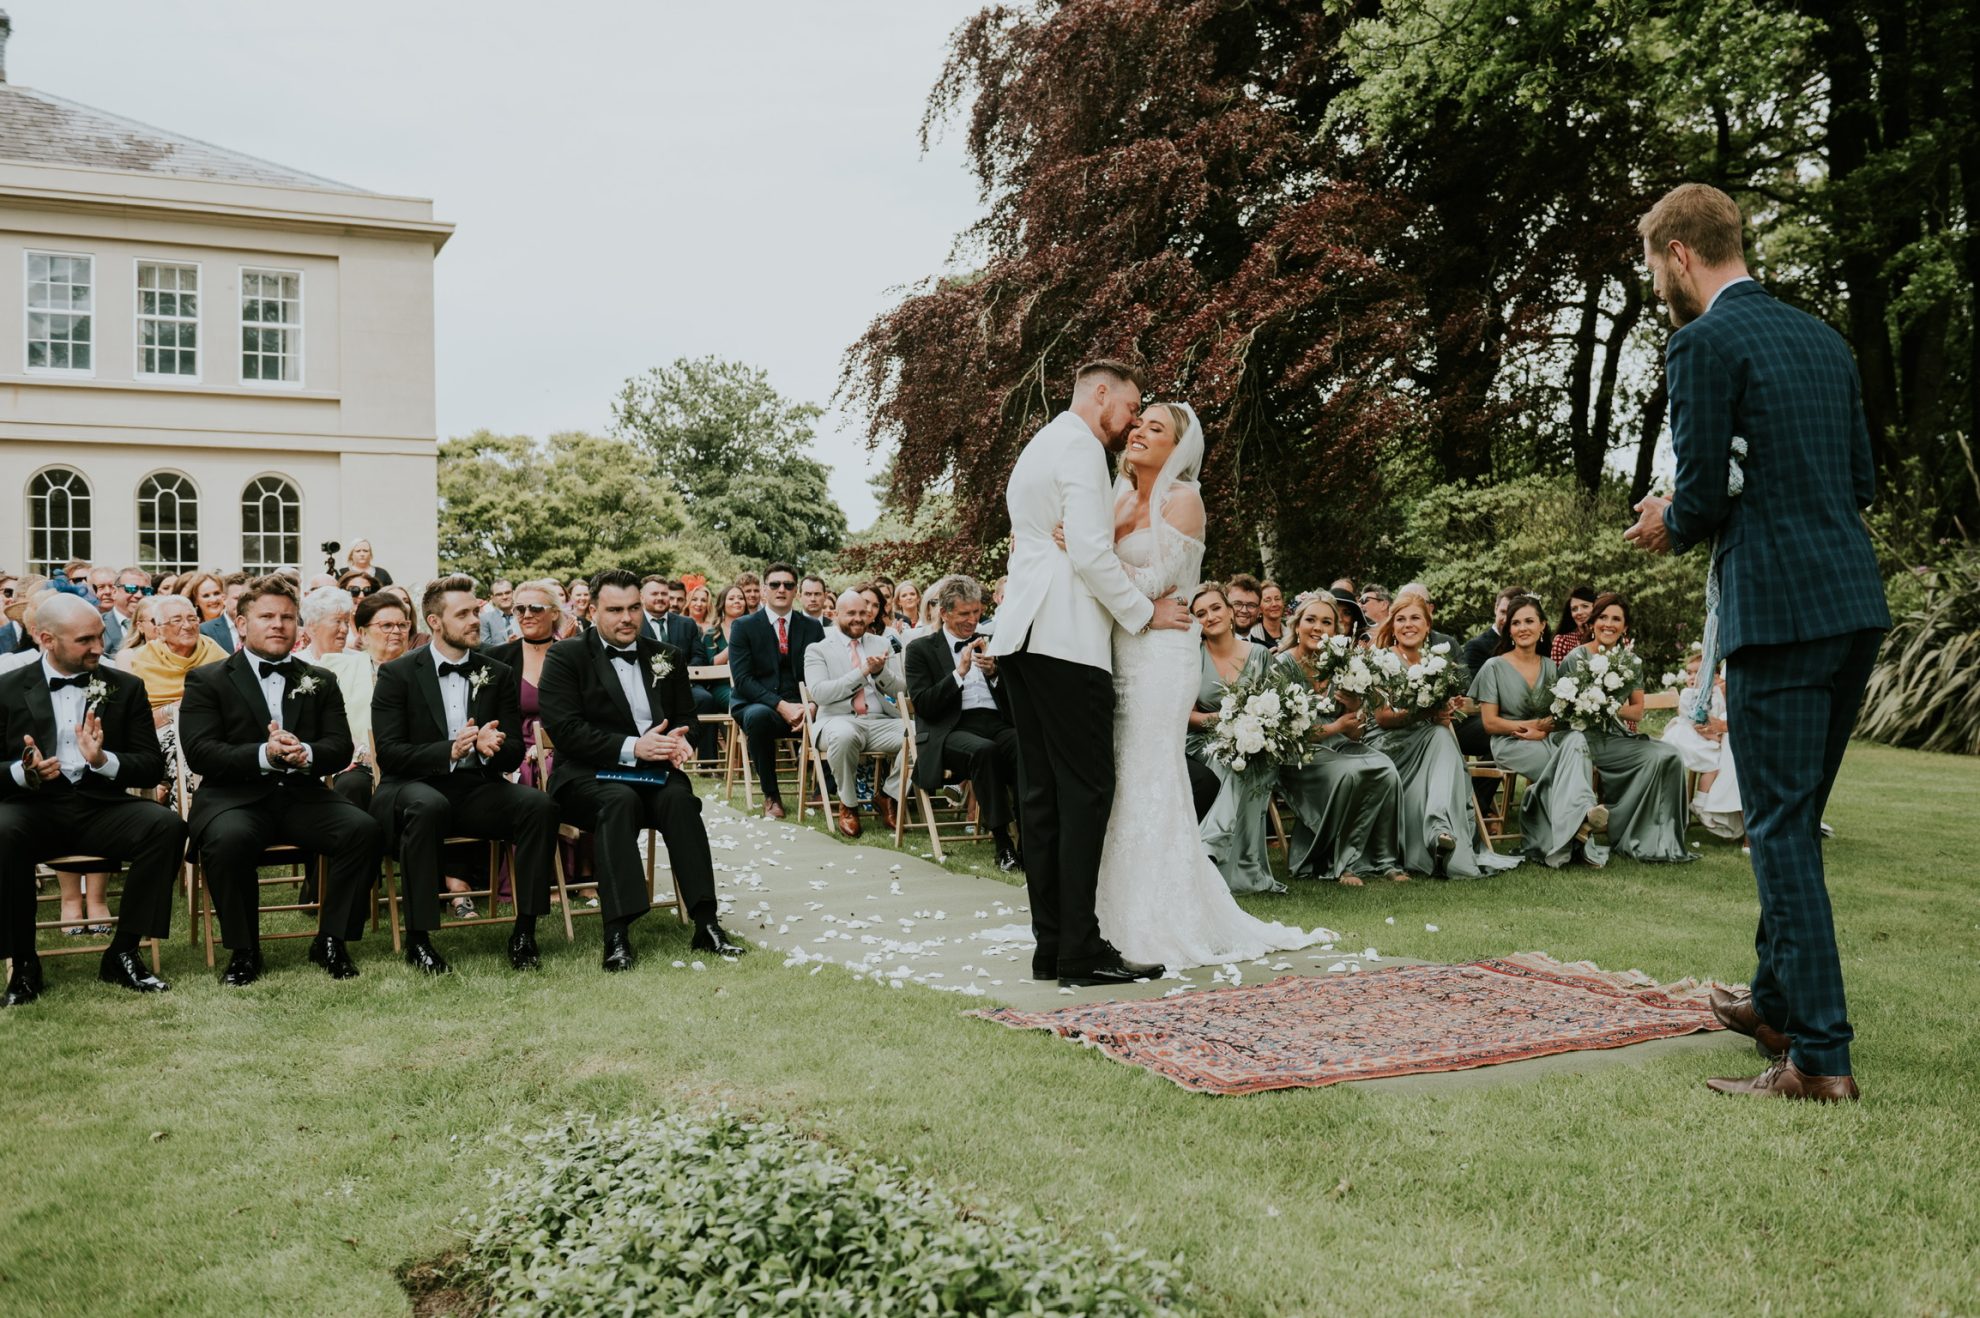 The wedding ceremony outside